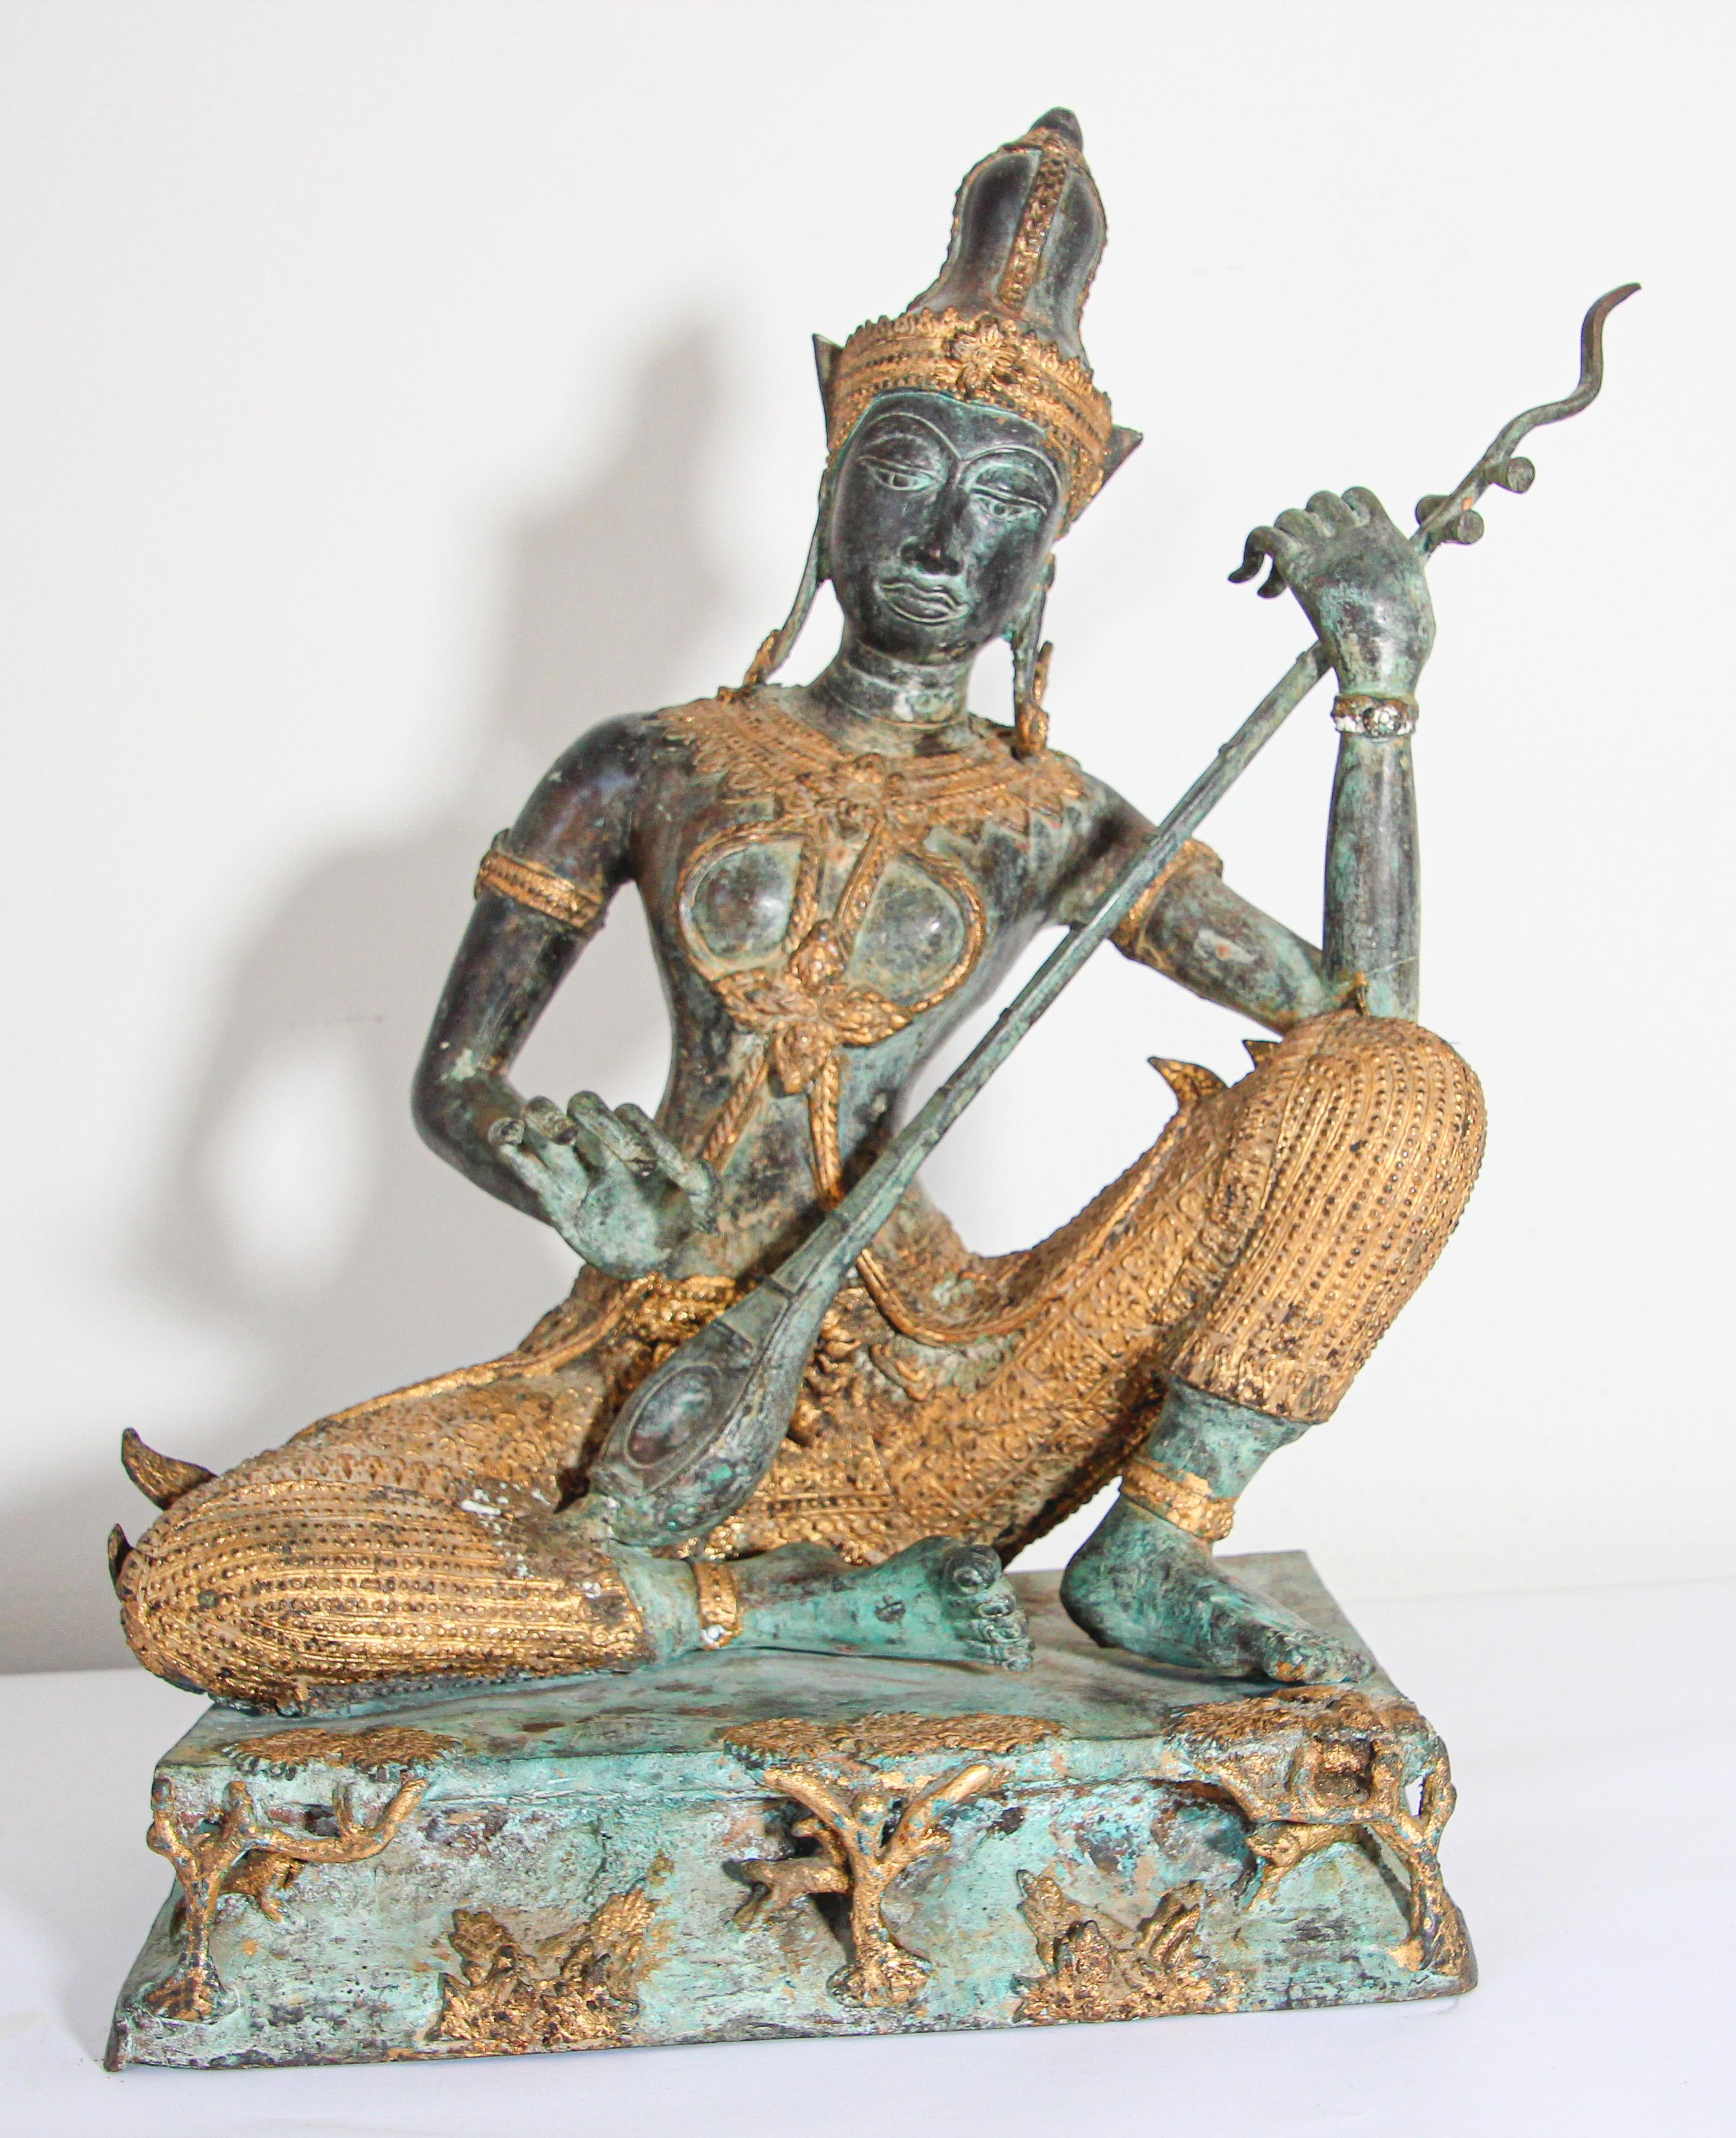 Large vintage heavy bronze statue of Prince Pra Apai Manee playing a traditional Asian string instrument called 